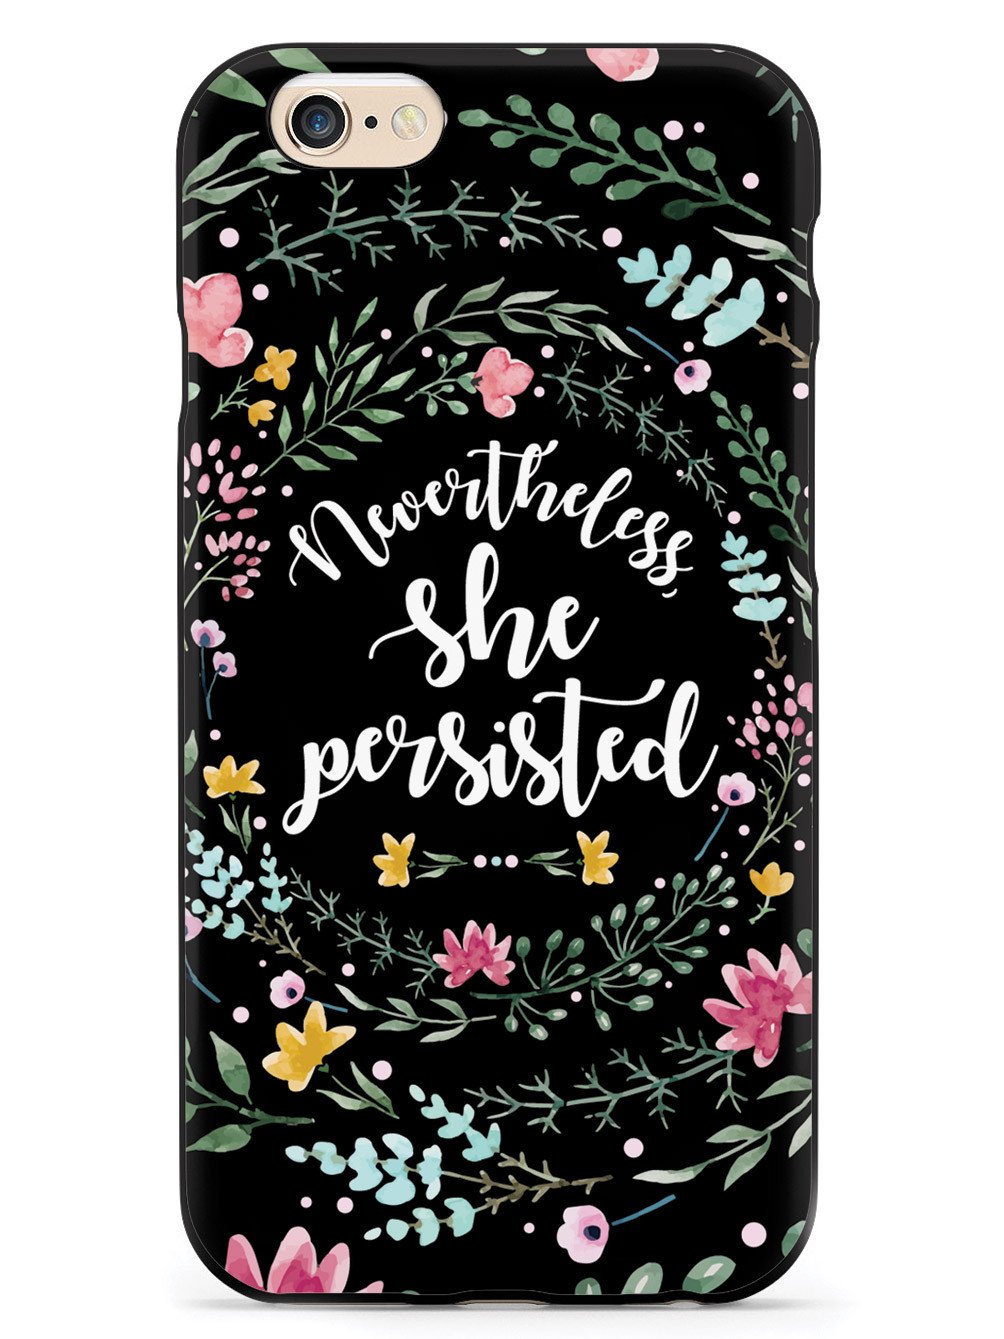 Nevertheless, She Persisted - Watercolor Flower Wreath - Black Case